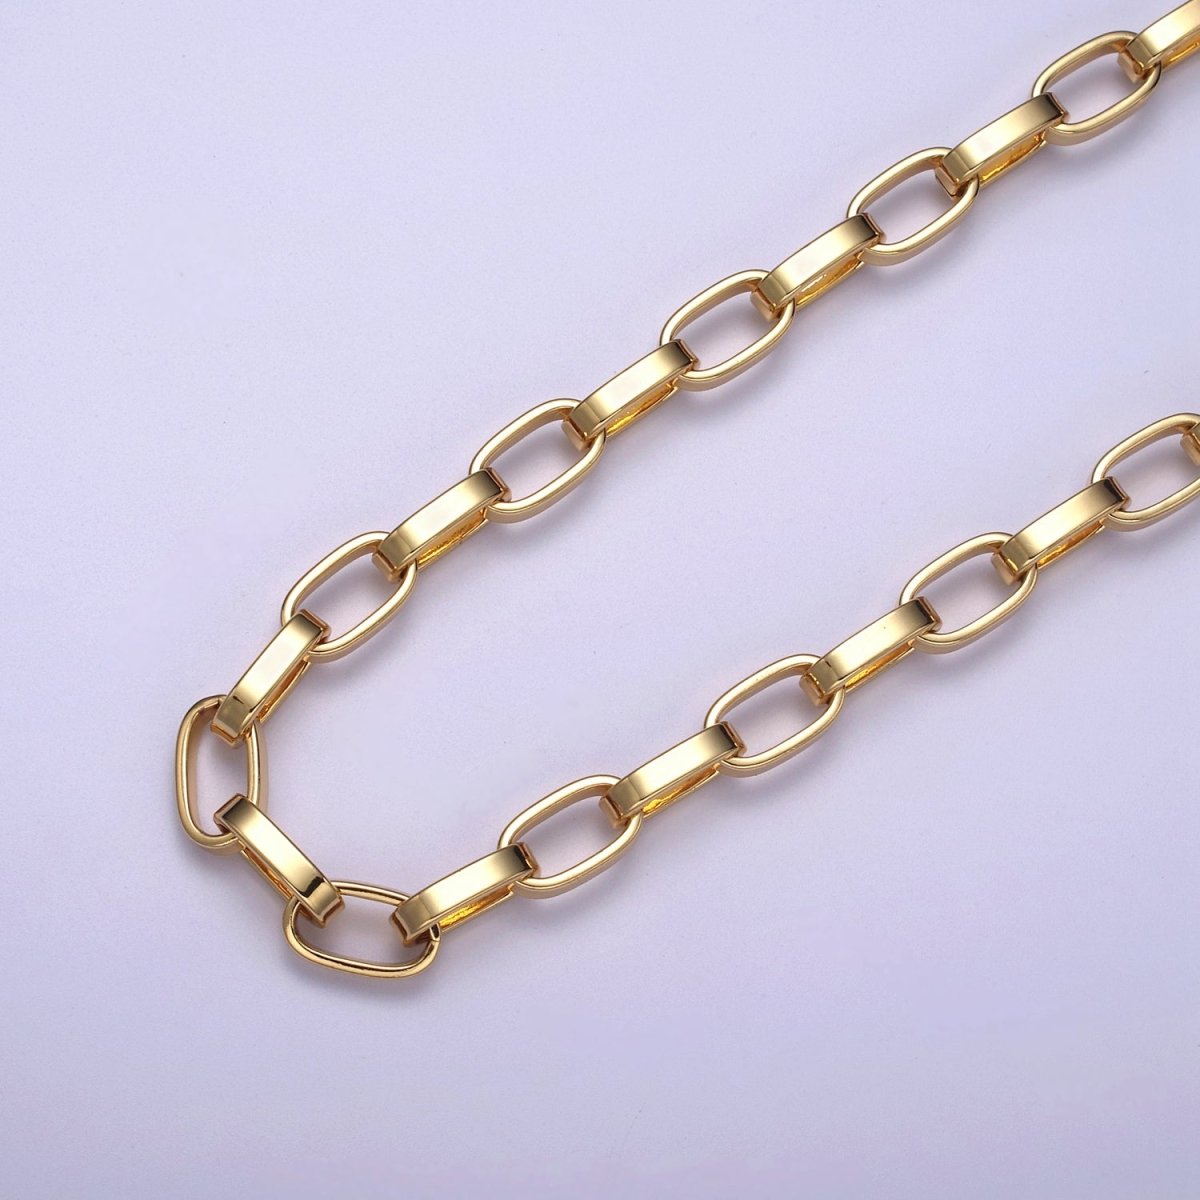 24K Gold Filled Unfinished Cable Chain, 14X8mm Wholesale Cable Chain For Jewelry Craft Making | ROLL-627 Clearance Pricing - DLUXCA